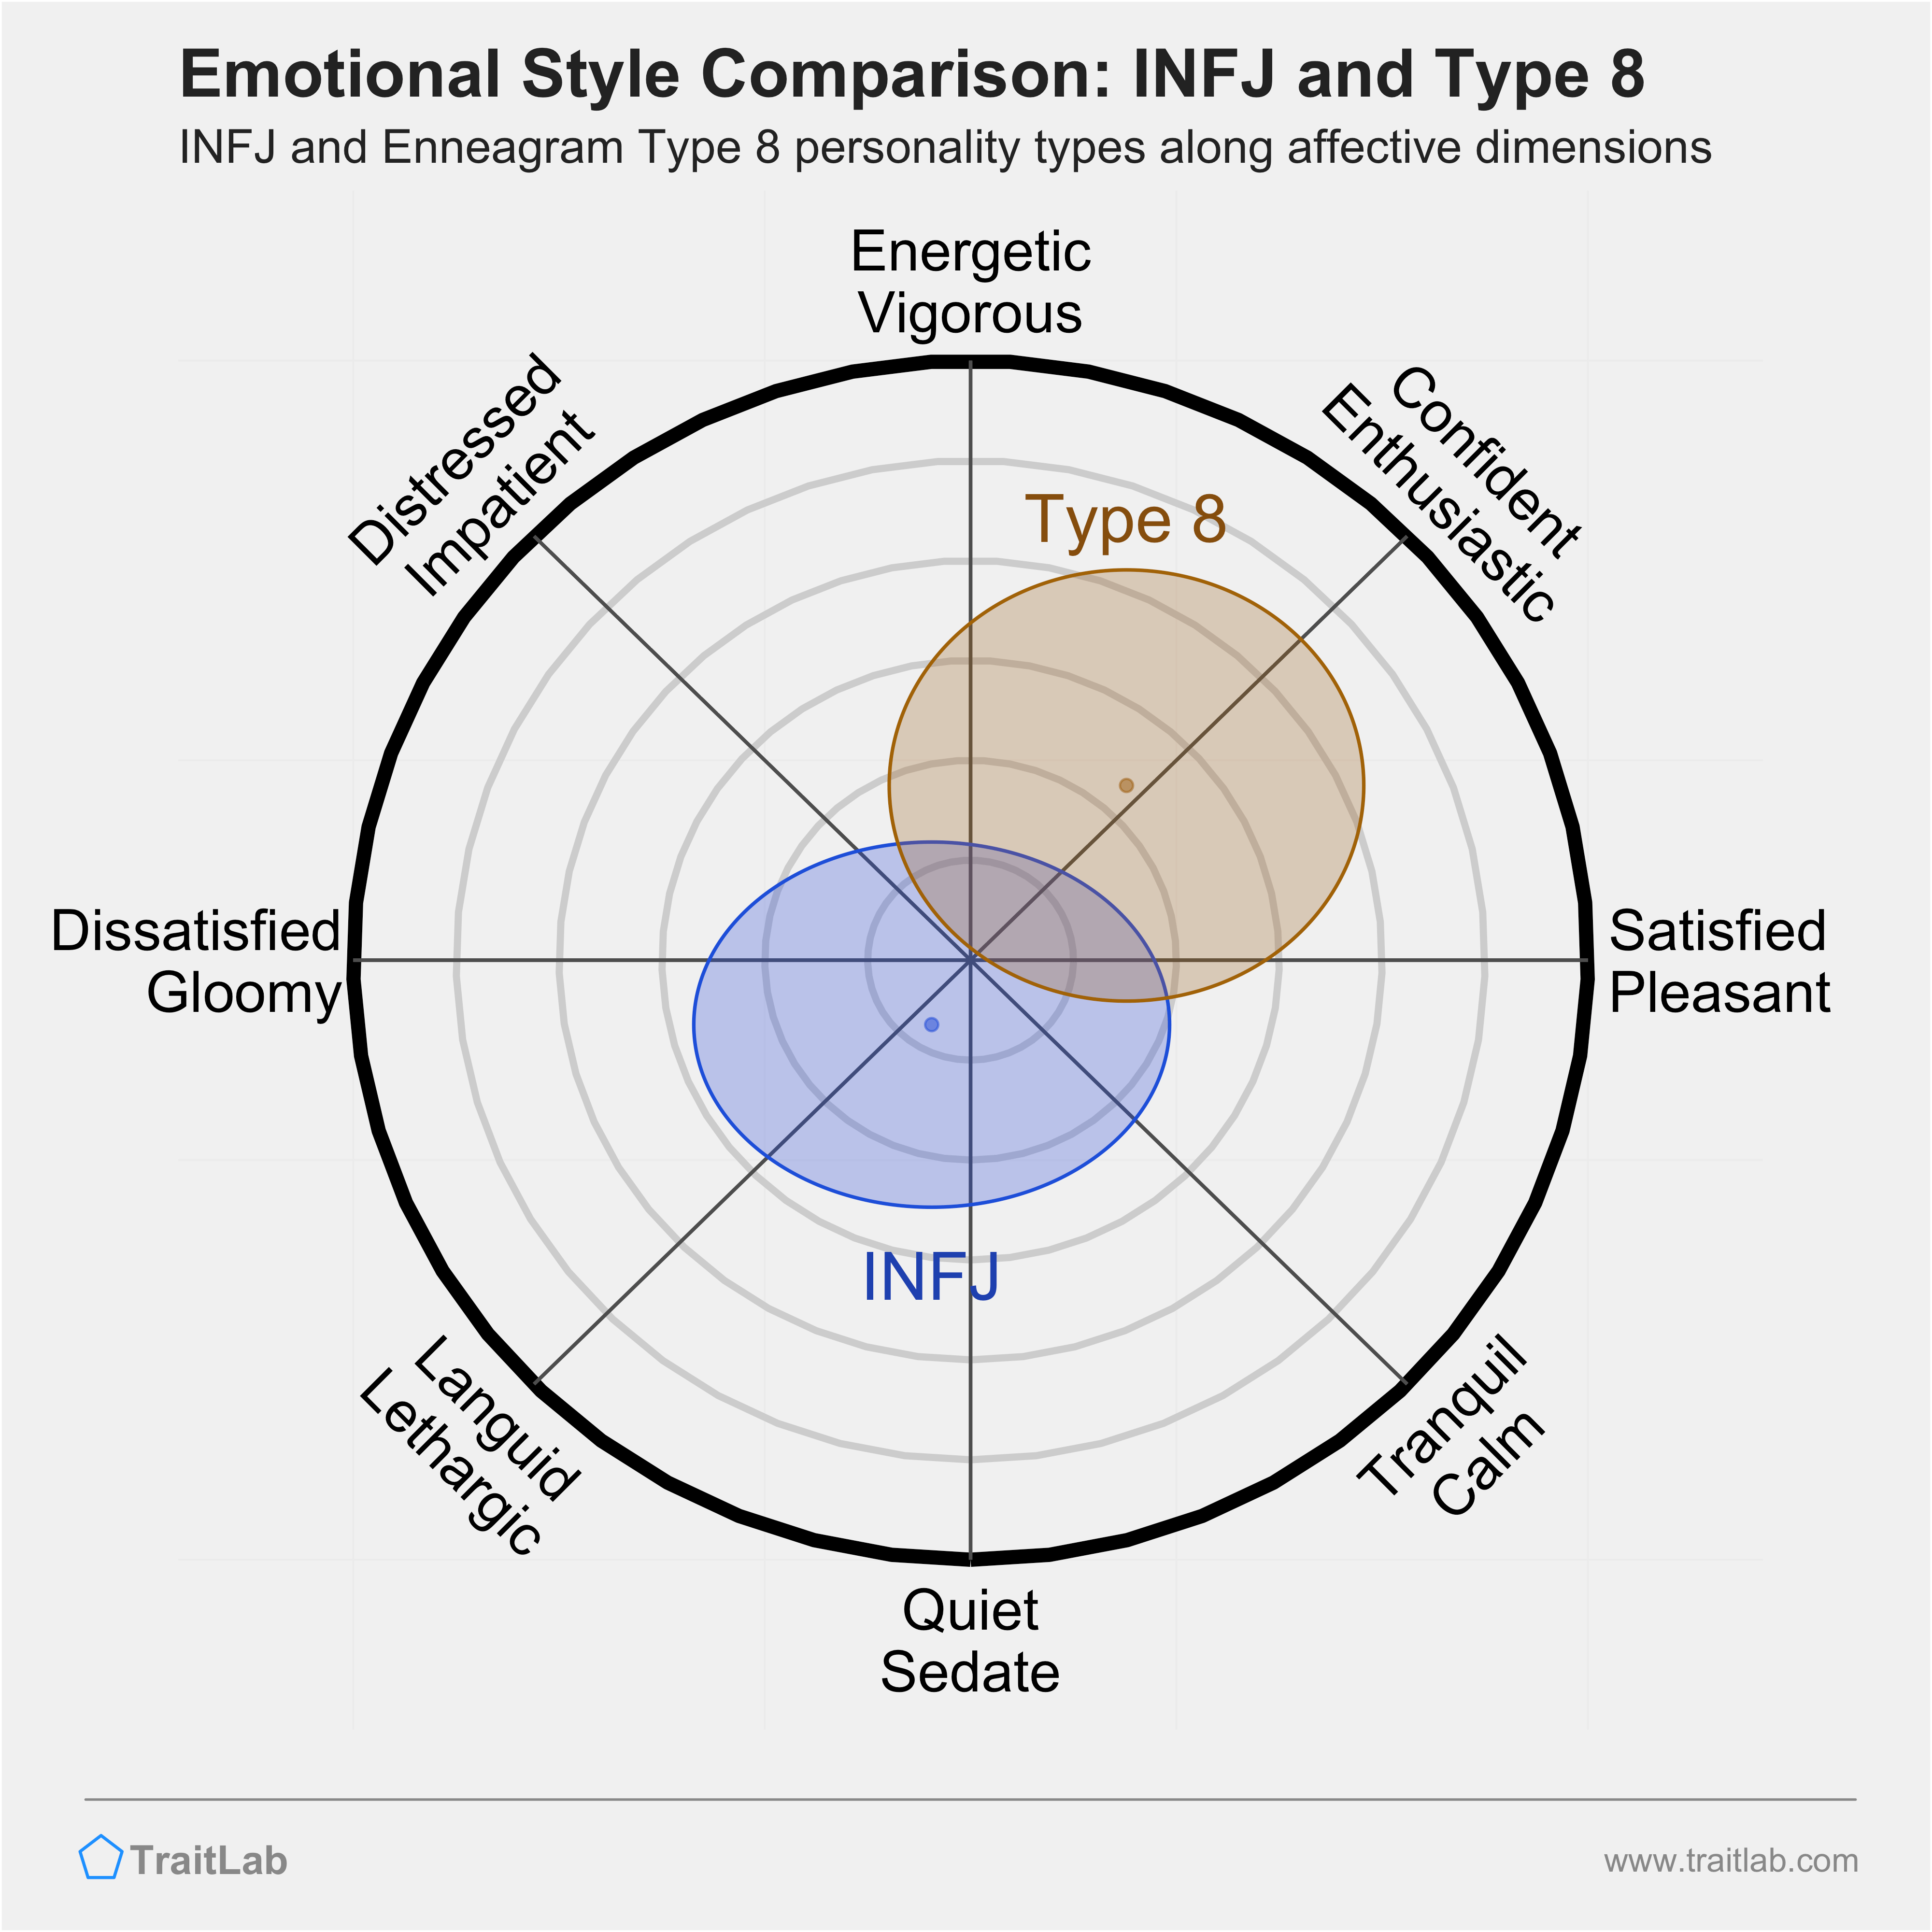 INFJ and Type 8 comparison across emotional (affective) dimensions